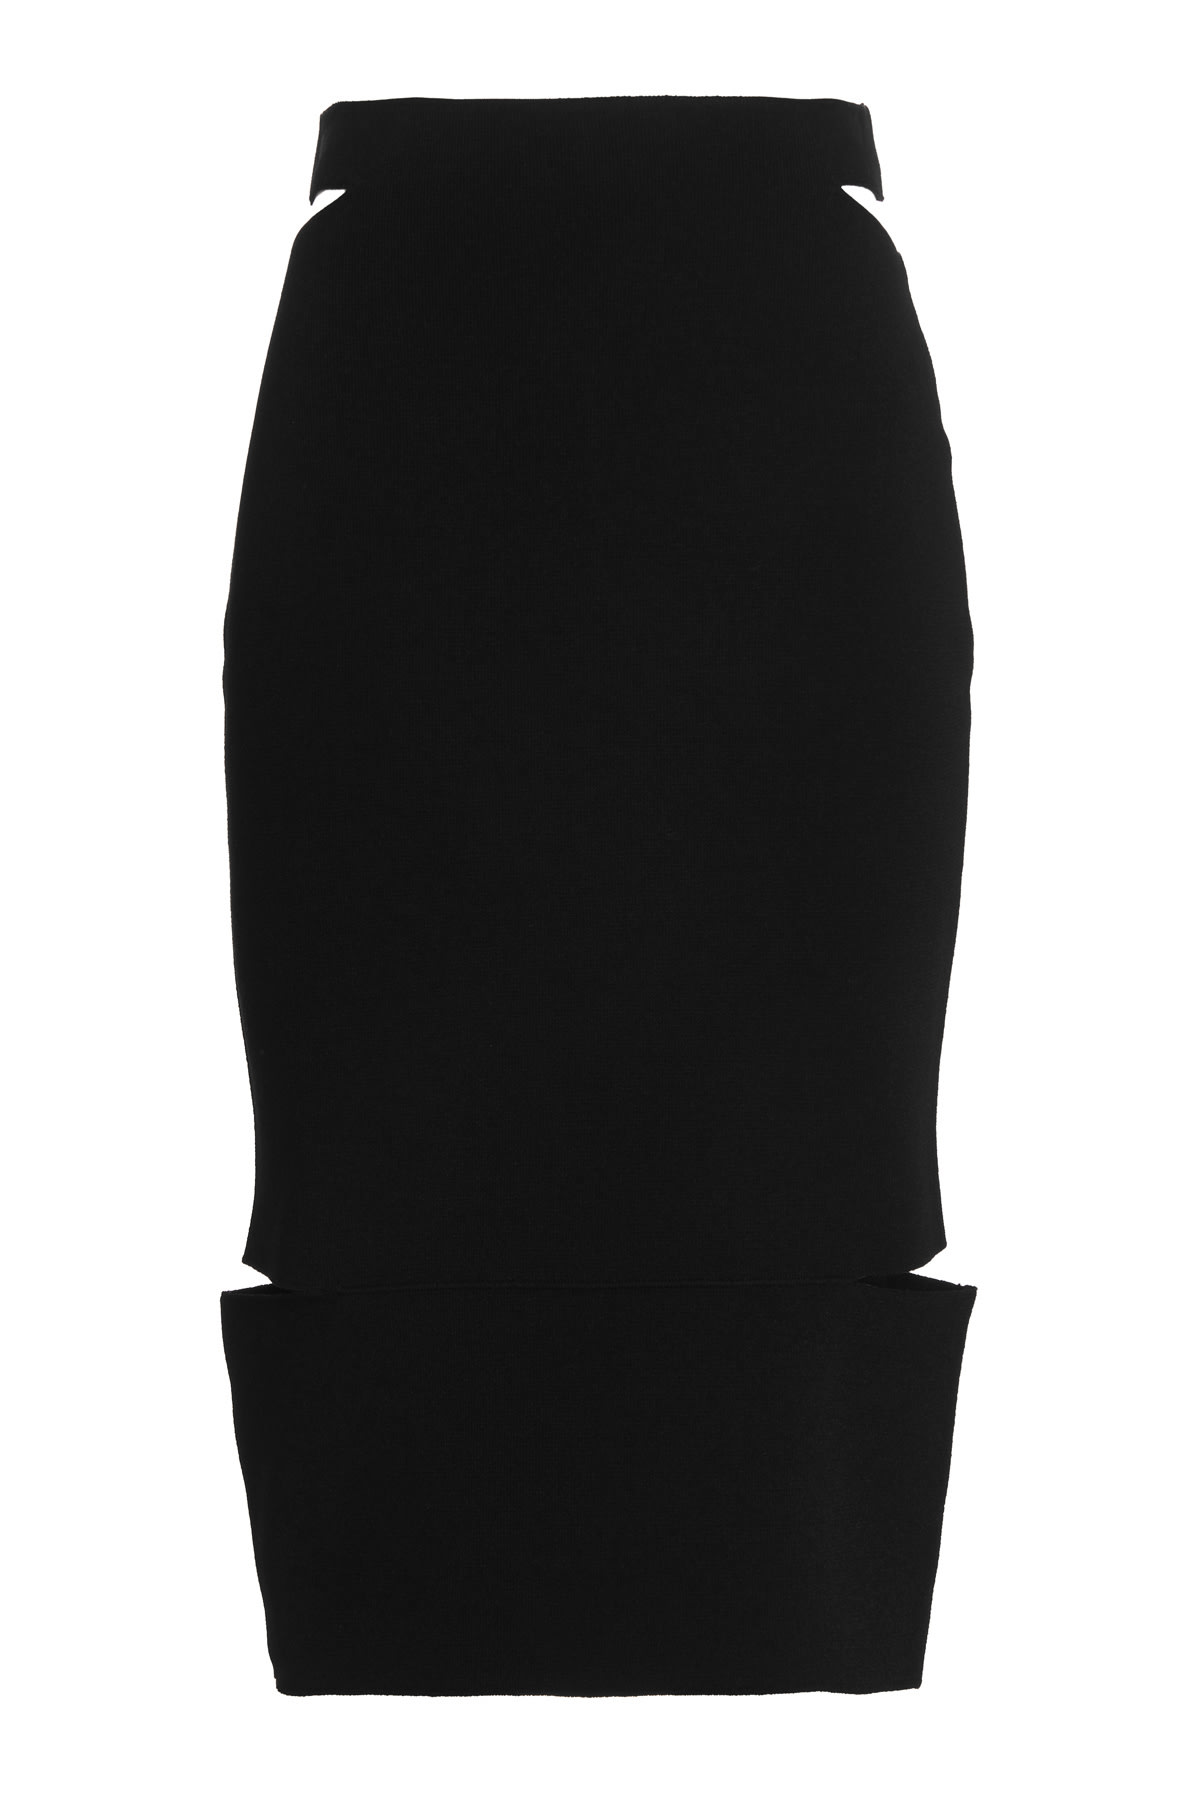 Tom Ford Cut Out Skirt